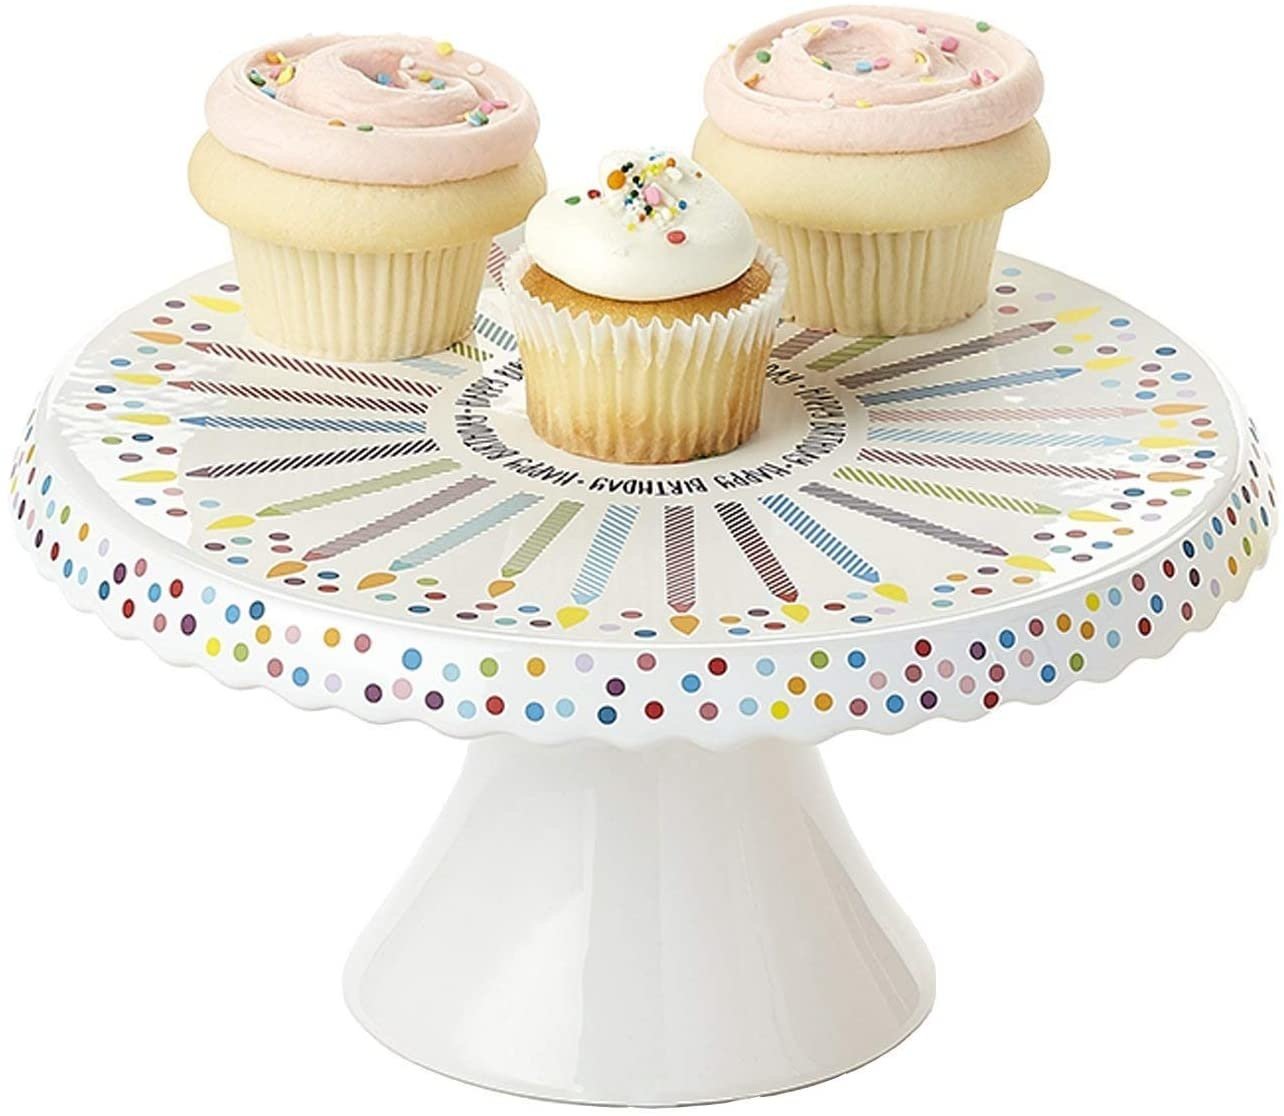 All Day Mart Plywood Wooden Cake Stand For Dining Table, Cake Cutting  Holder For Birthdays &